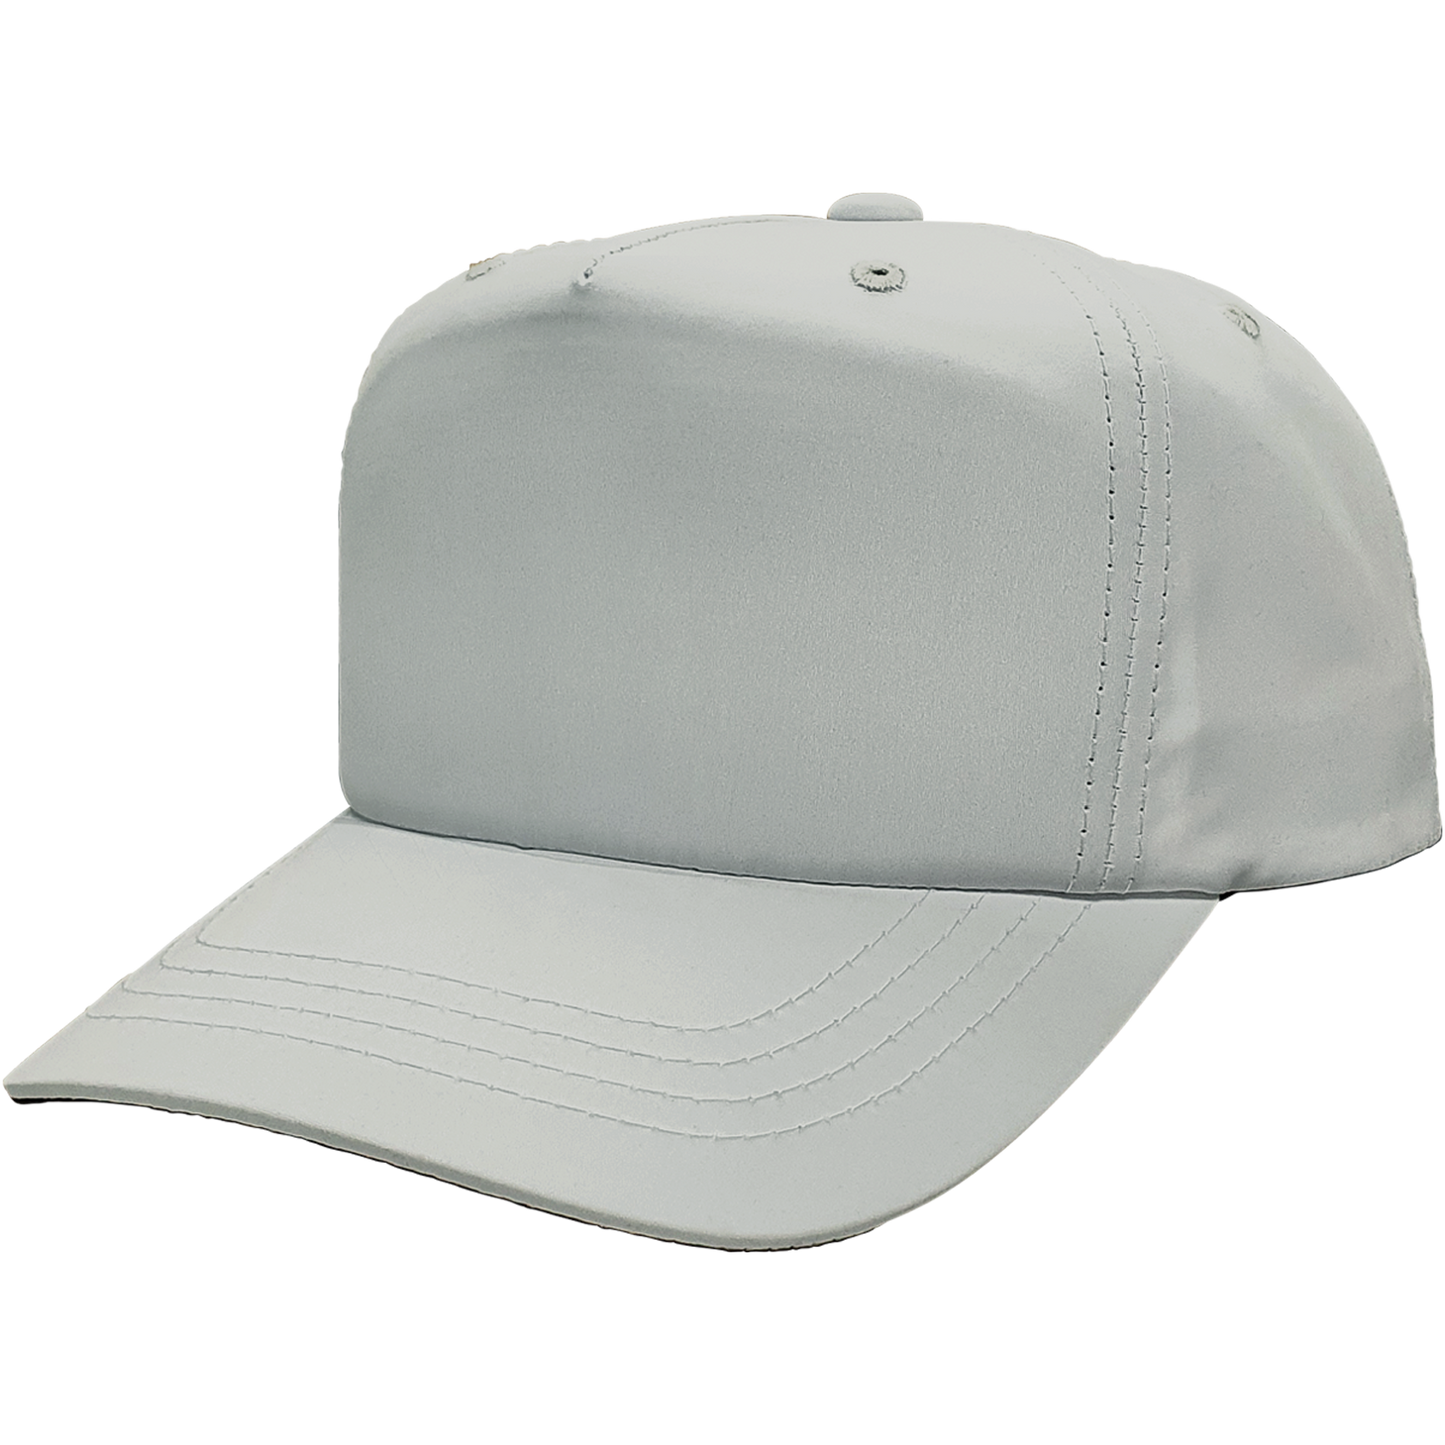 5 Panel Soft Structured with Stay Front - 9905